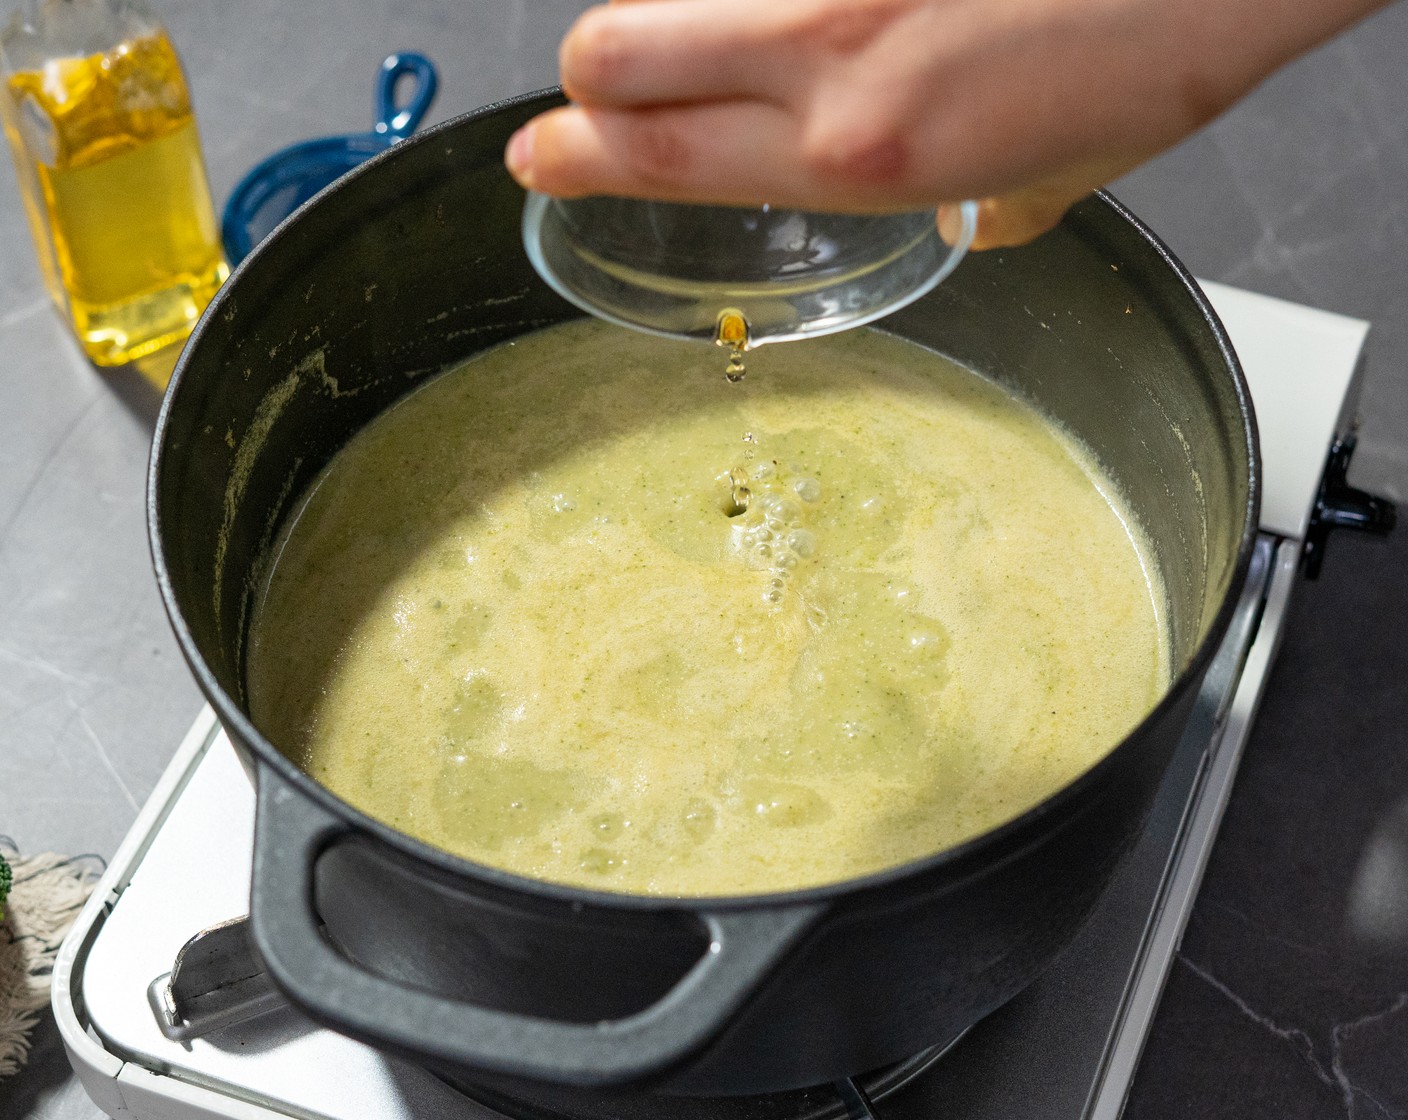 step 4 Bring mixture to a boil, then simmer for 5 more minutes. Stir in the White Wine Vinegar (1 tsp) and remove from heat.